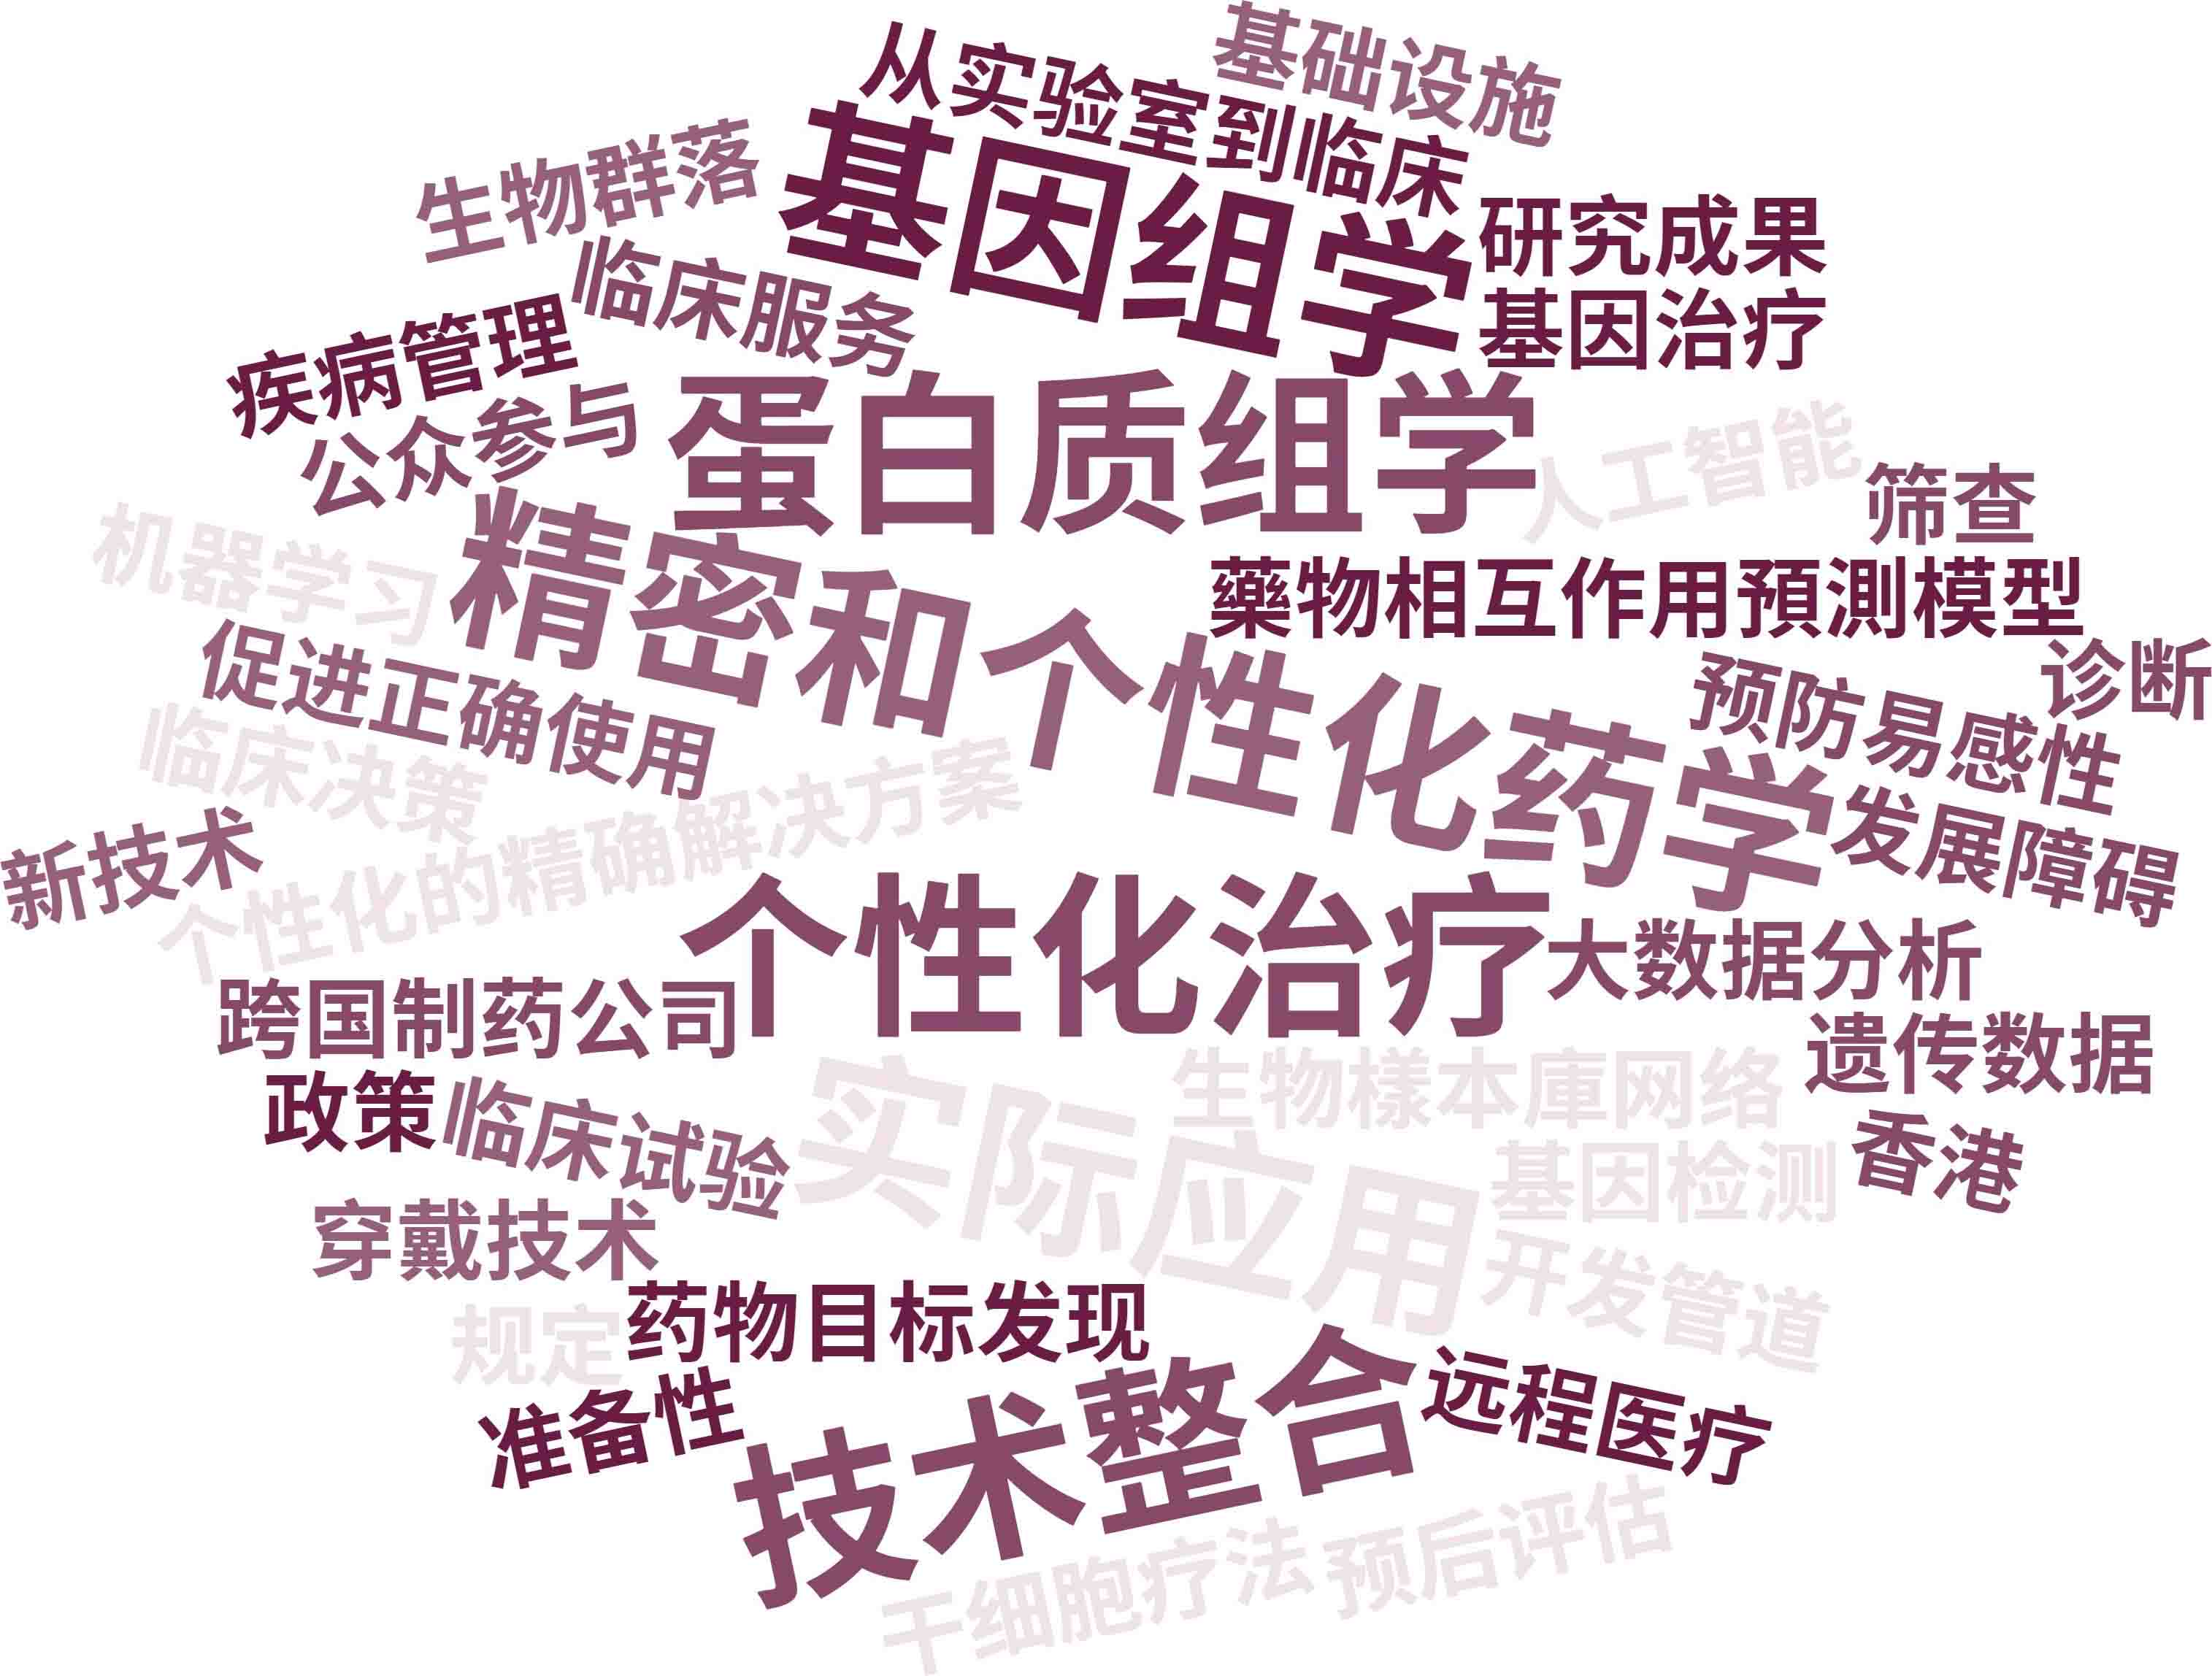 Topics Word Cloud Chinese